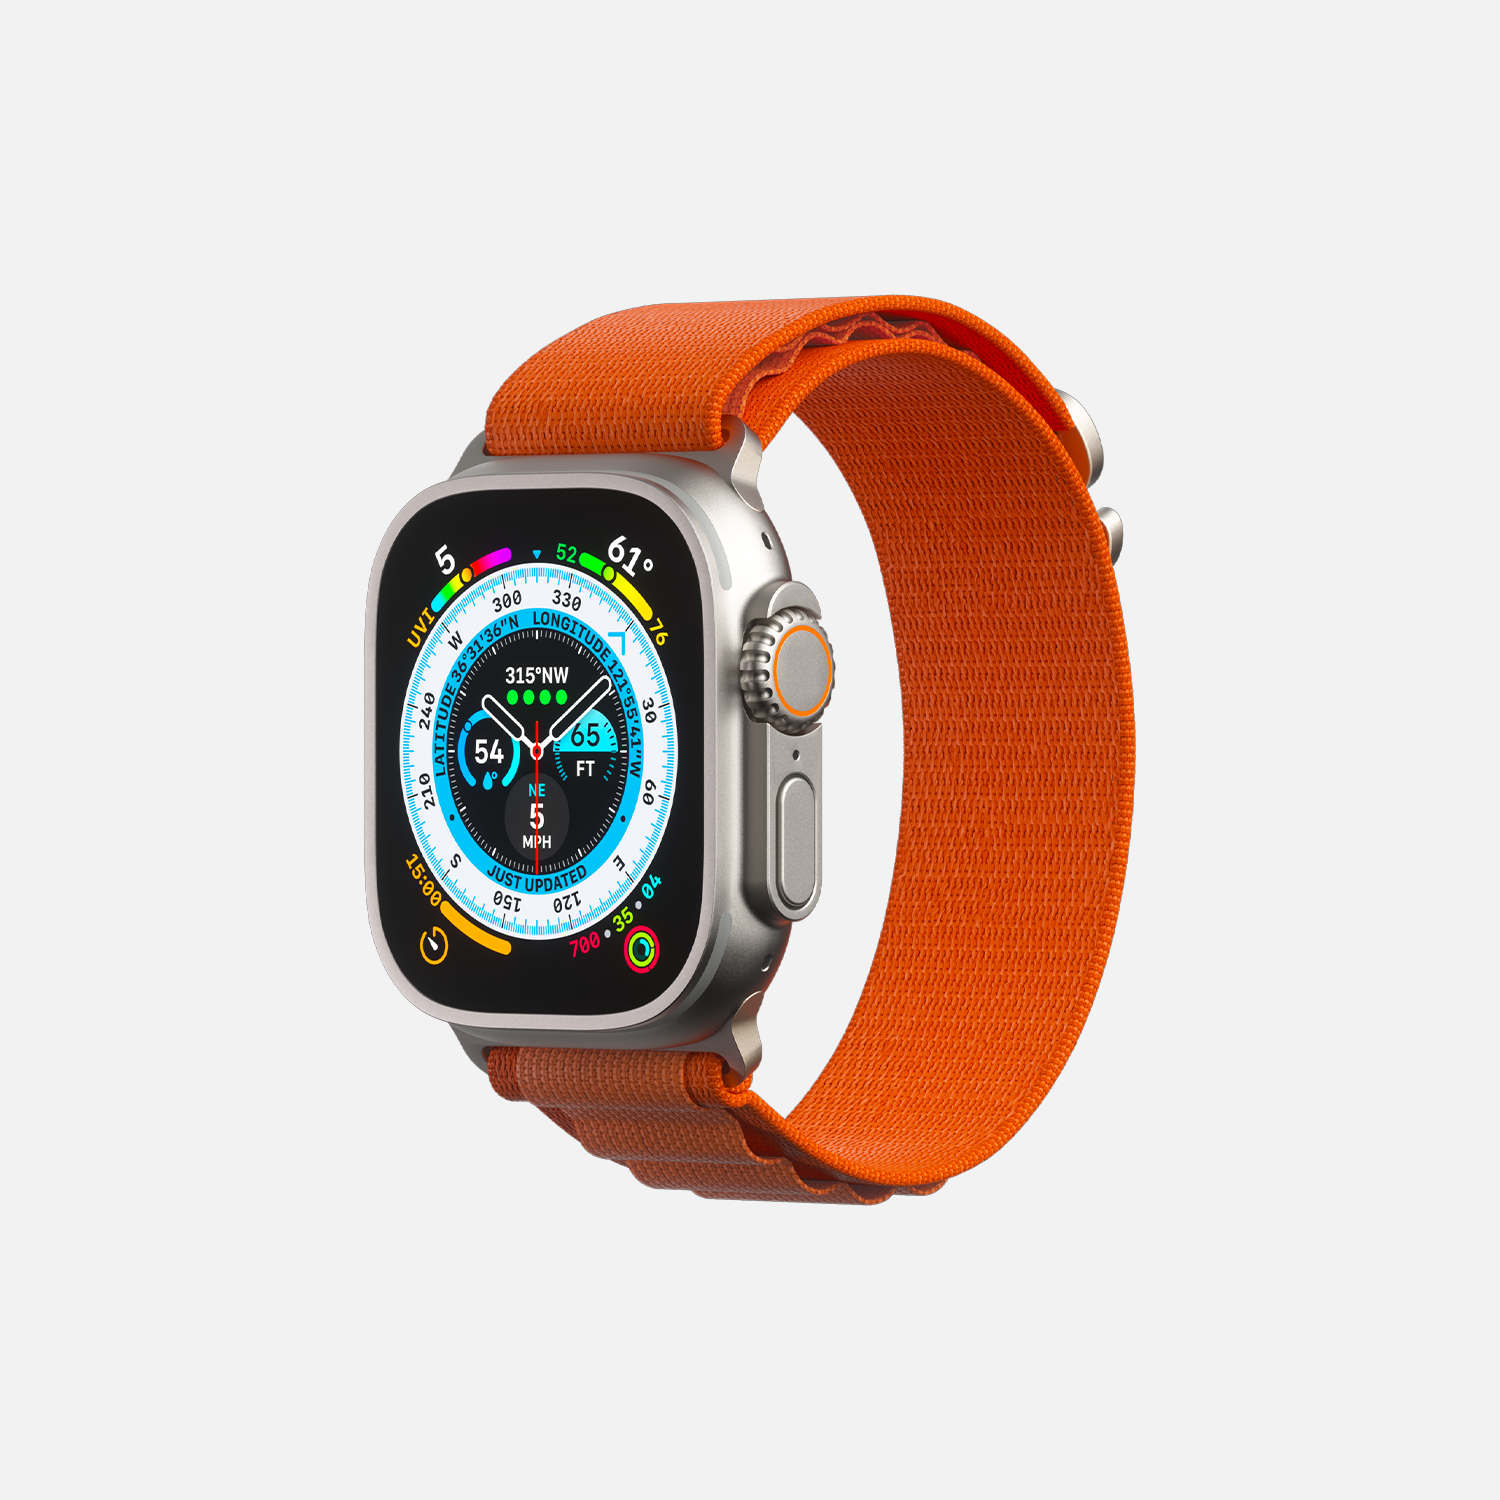 Smartwatch with orange strap and detailed digital compass face on white background.